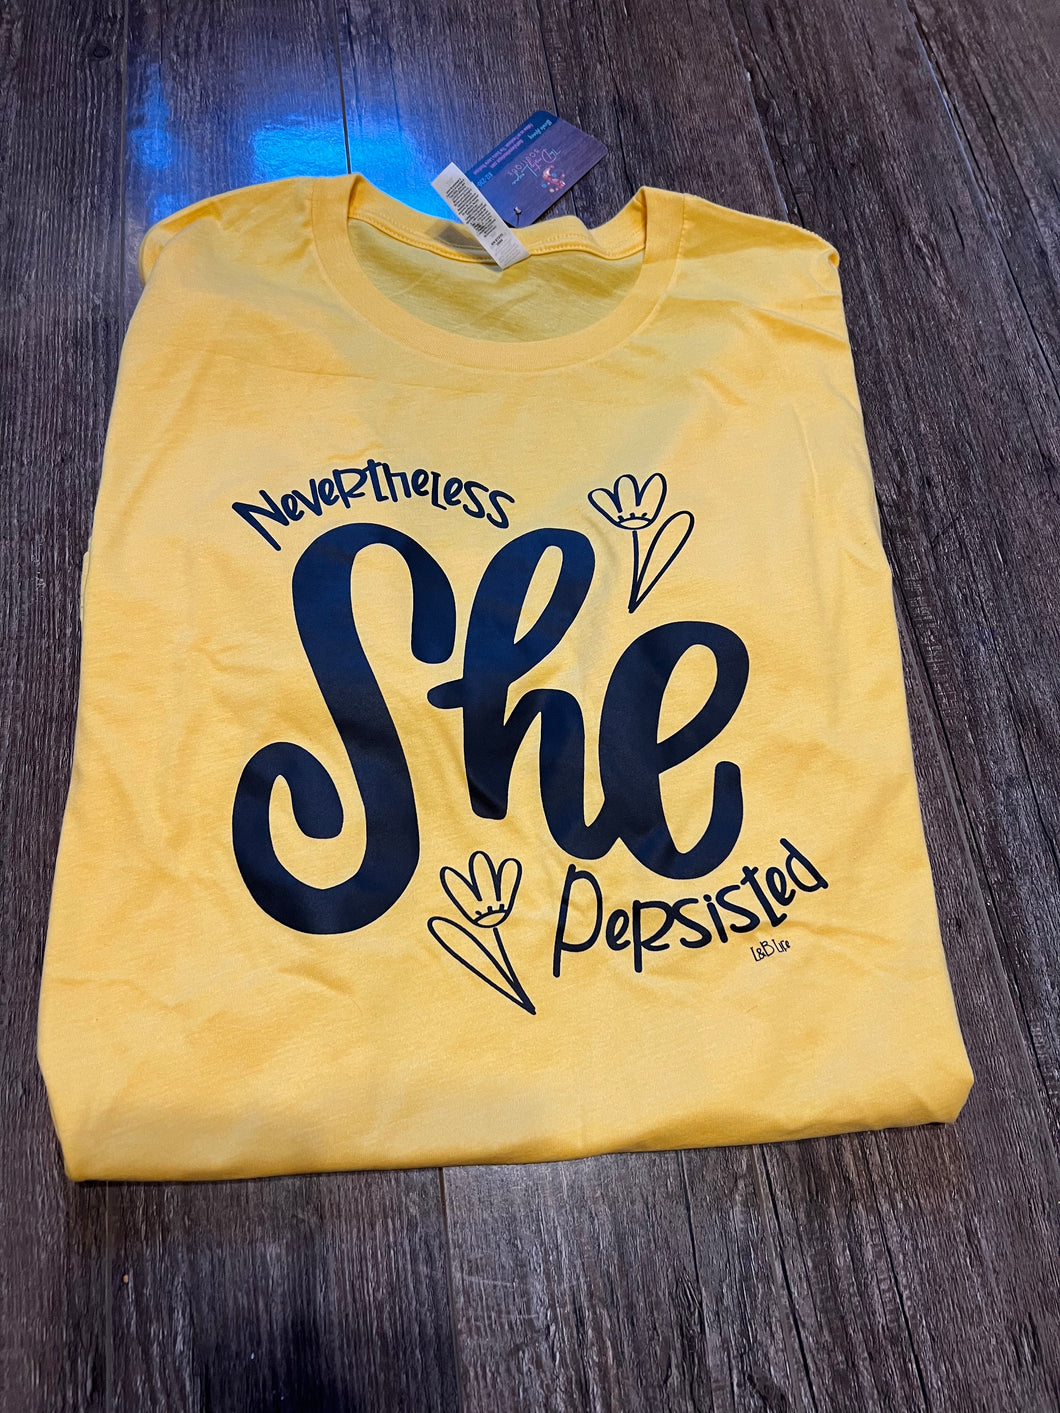 She Persisted Tee